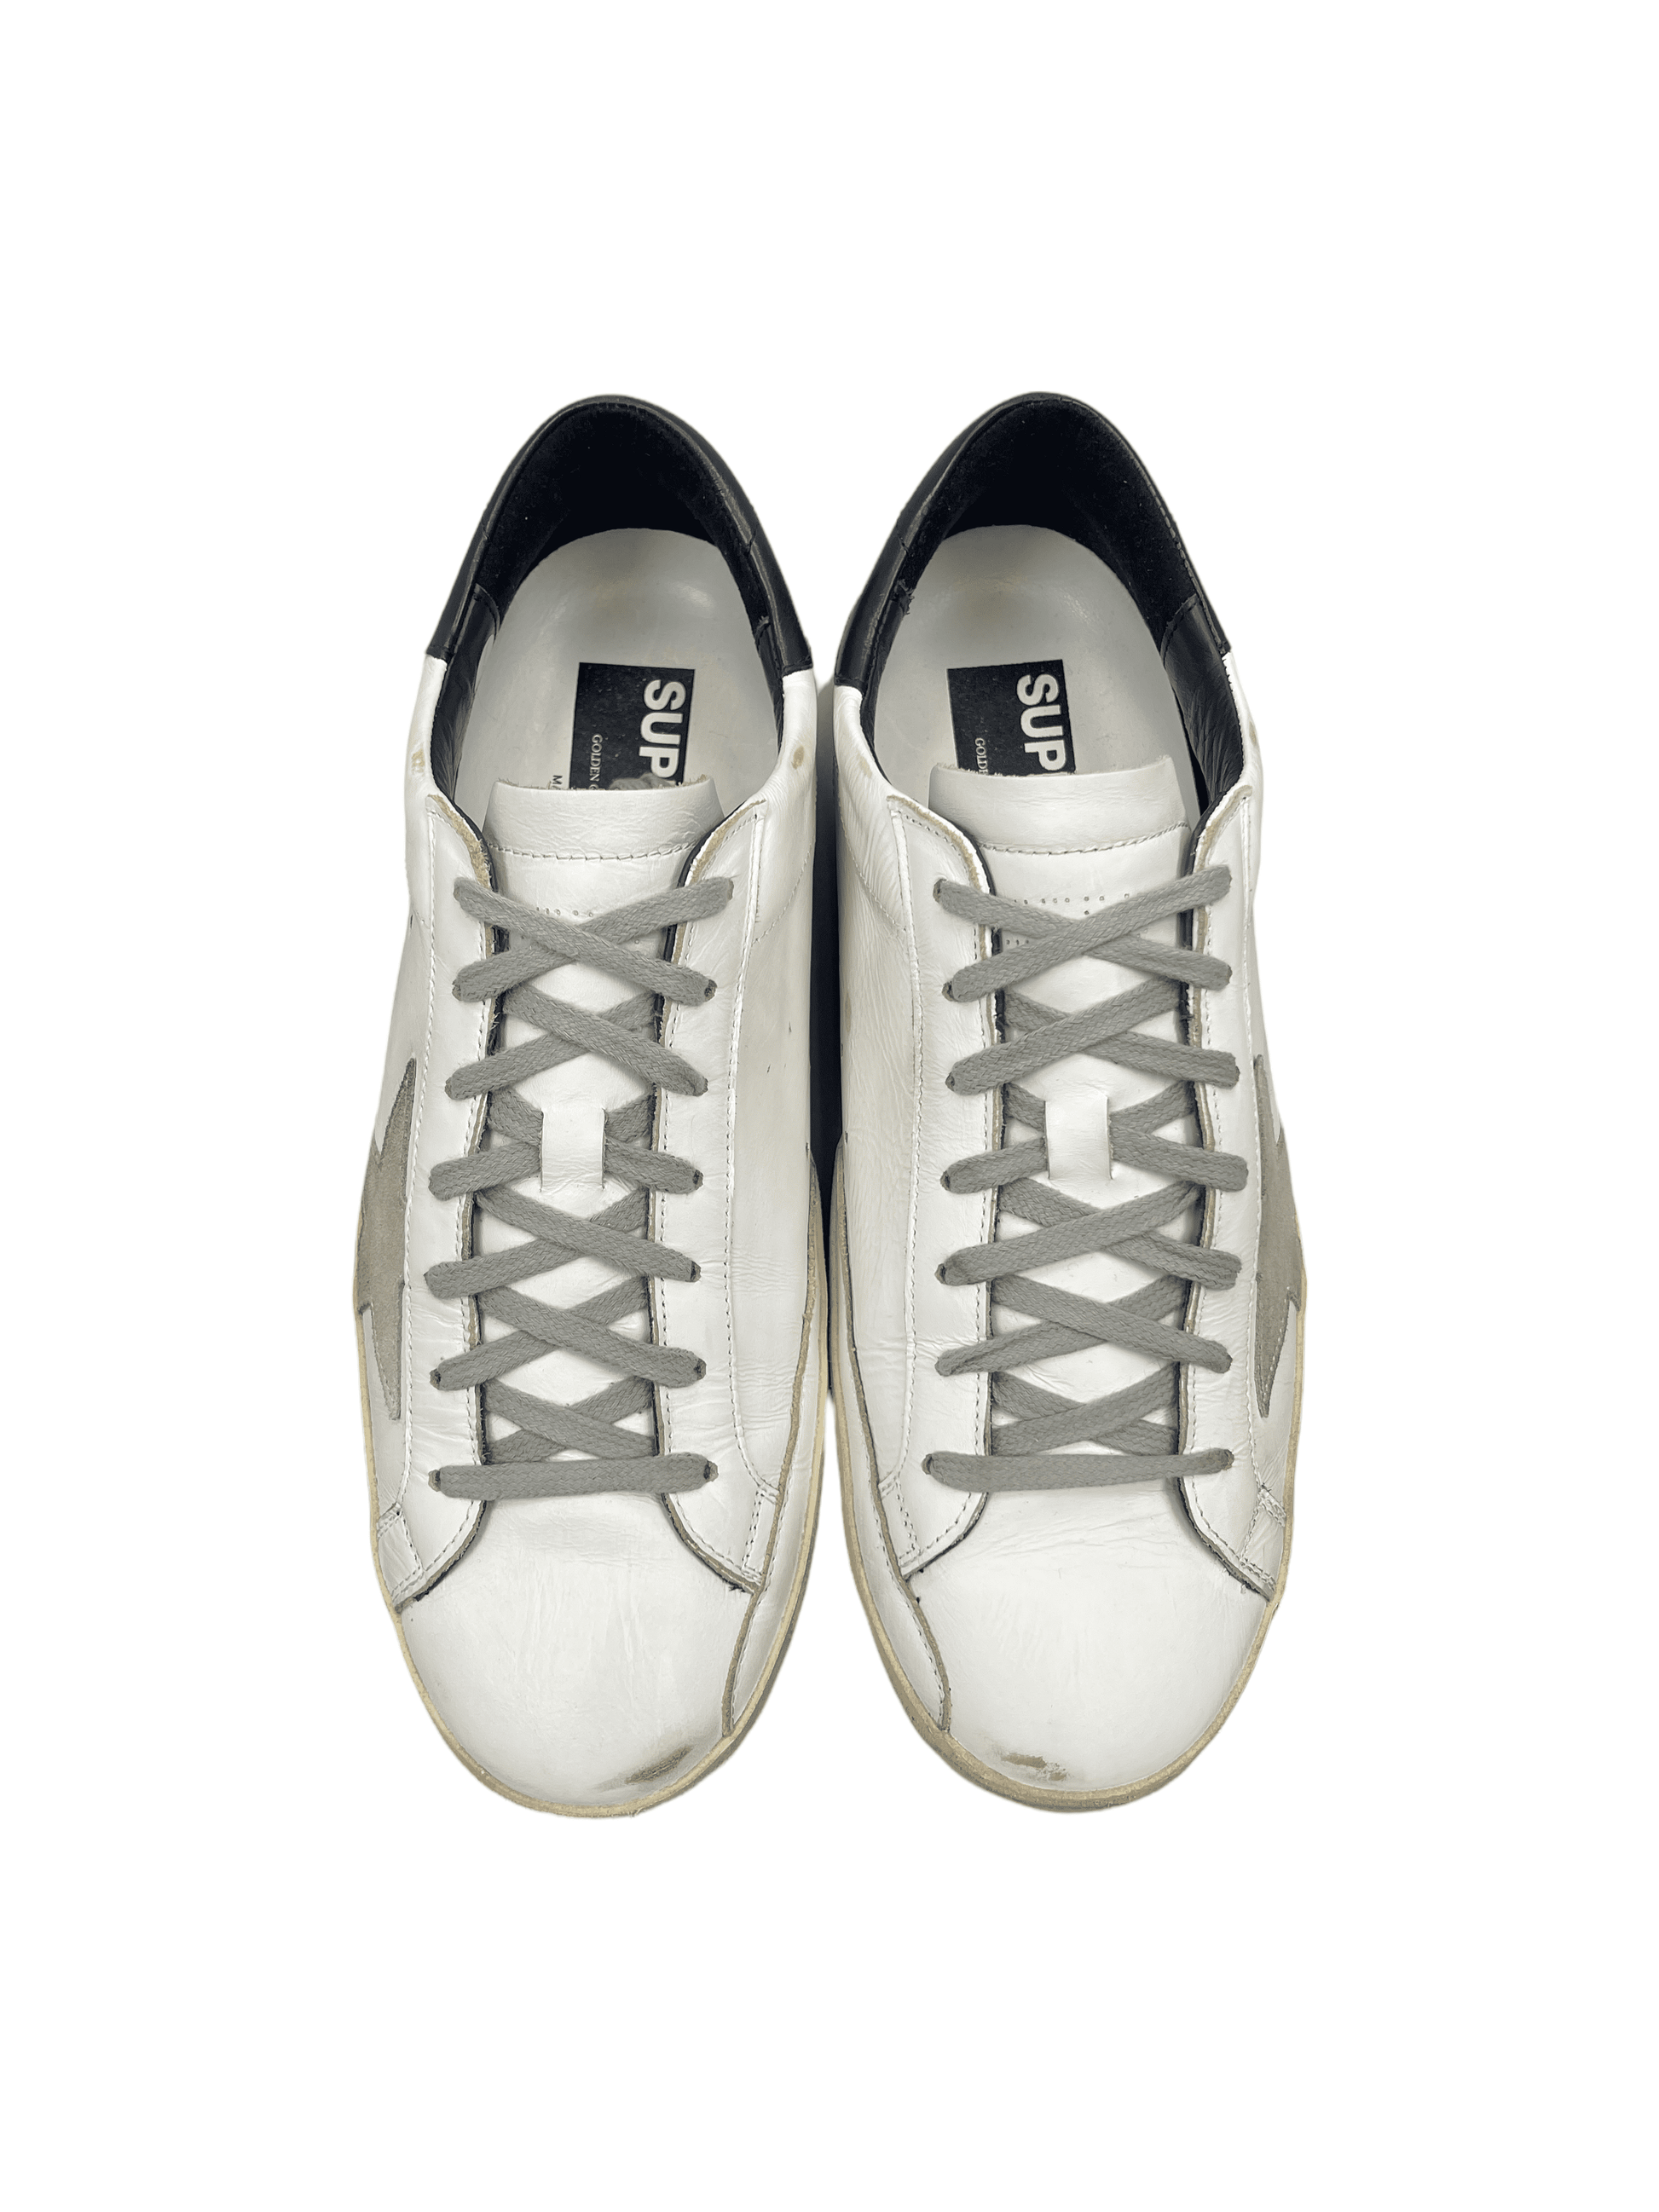 Golden Goose Superstar White Grey Navy 9 US - Genuine Design Luxury Consignment for Men. New & Pre-Owned Clothing, Shoes, & Accessories. Calgary, Canada